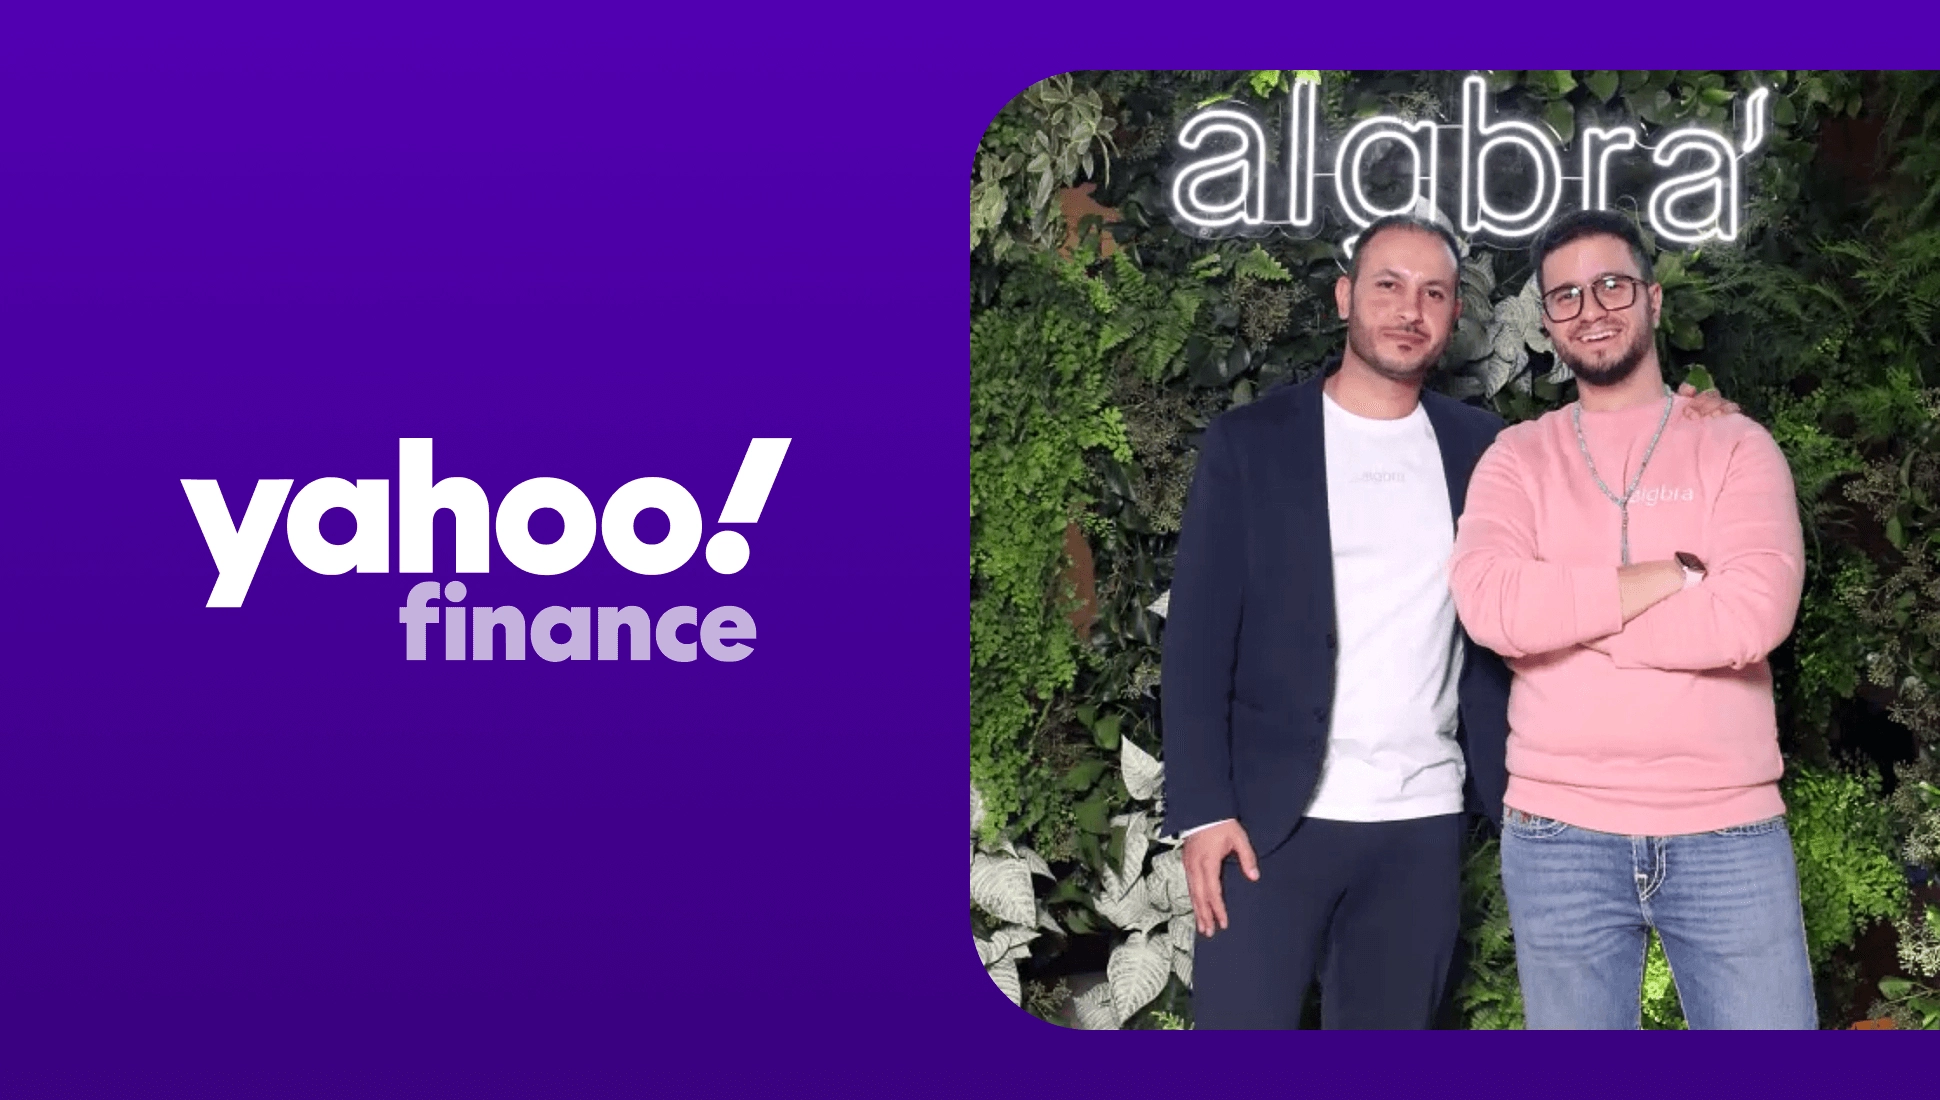 Algbra becomes first ethical FinTech to receive Authorised E-Money Institution License from the FCA